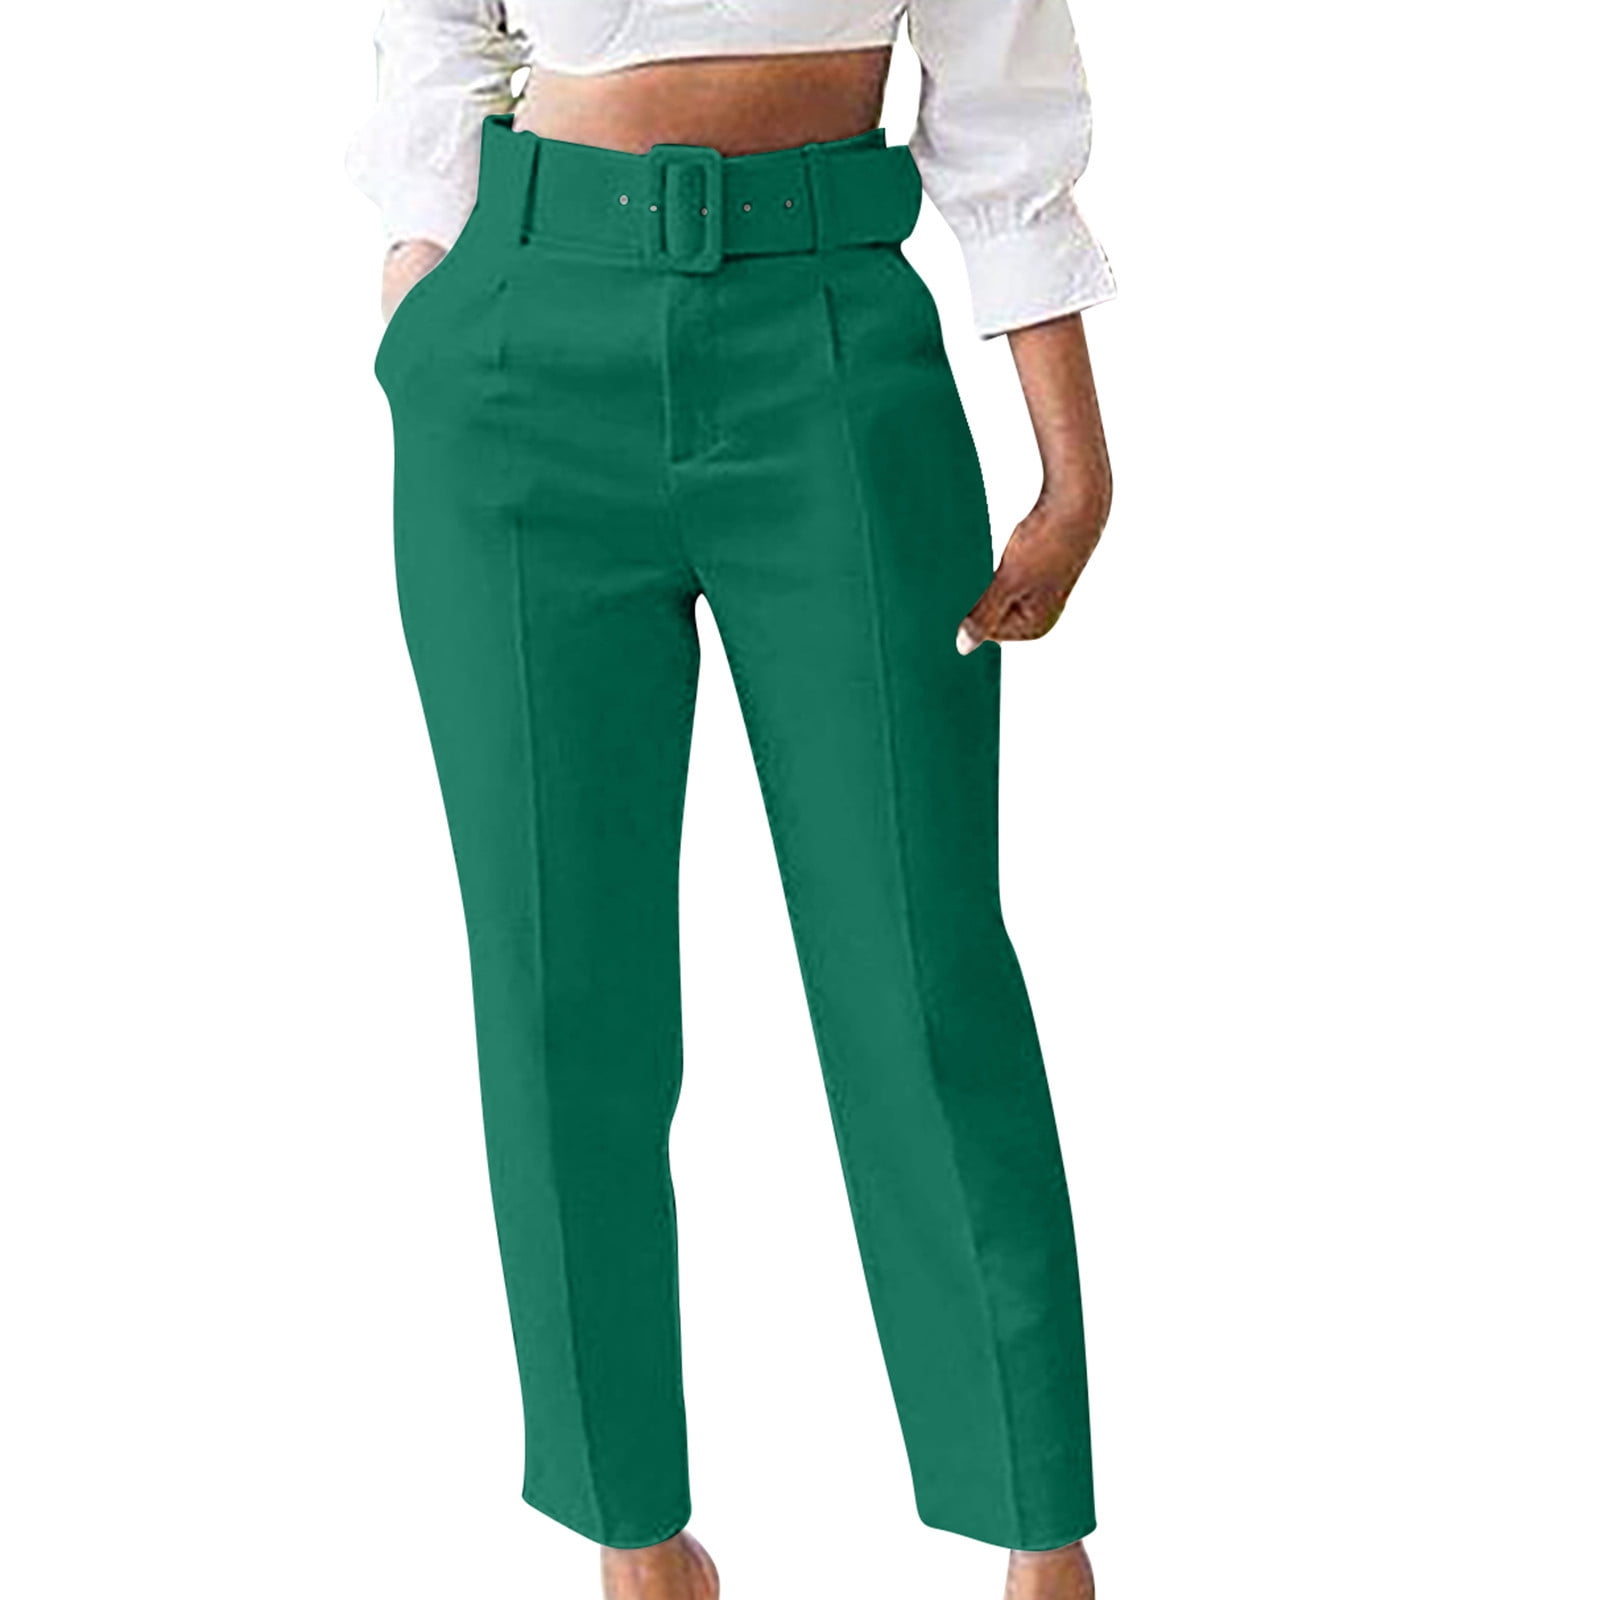 Ginasy Black Dress Pants for Women Business Casual India | Ubuy